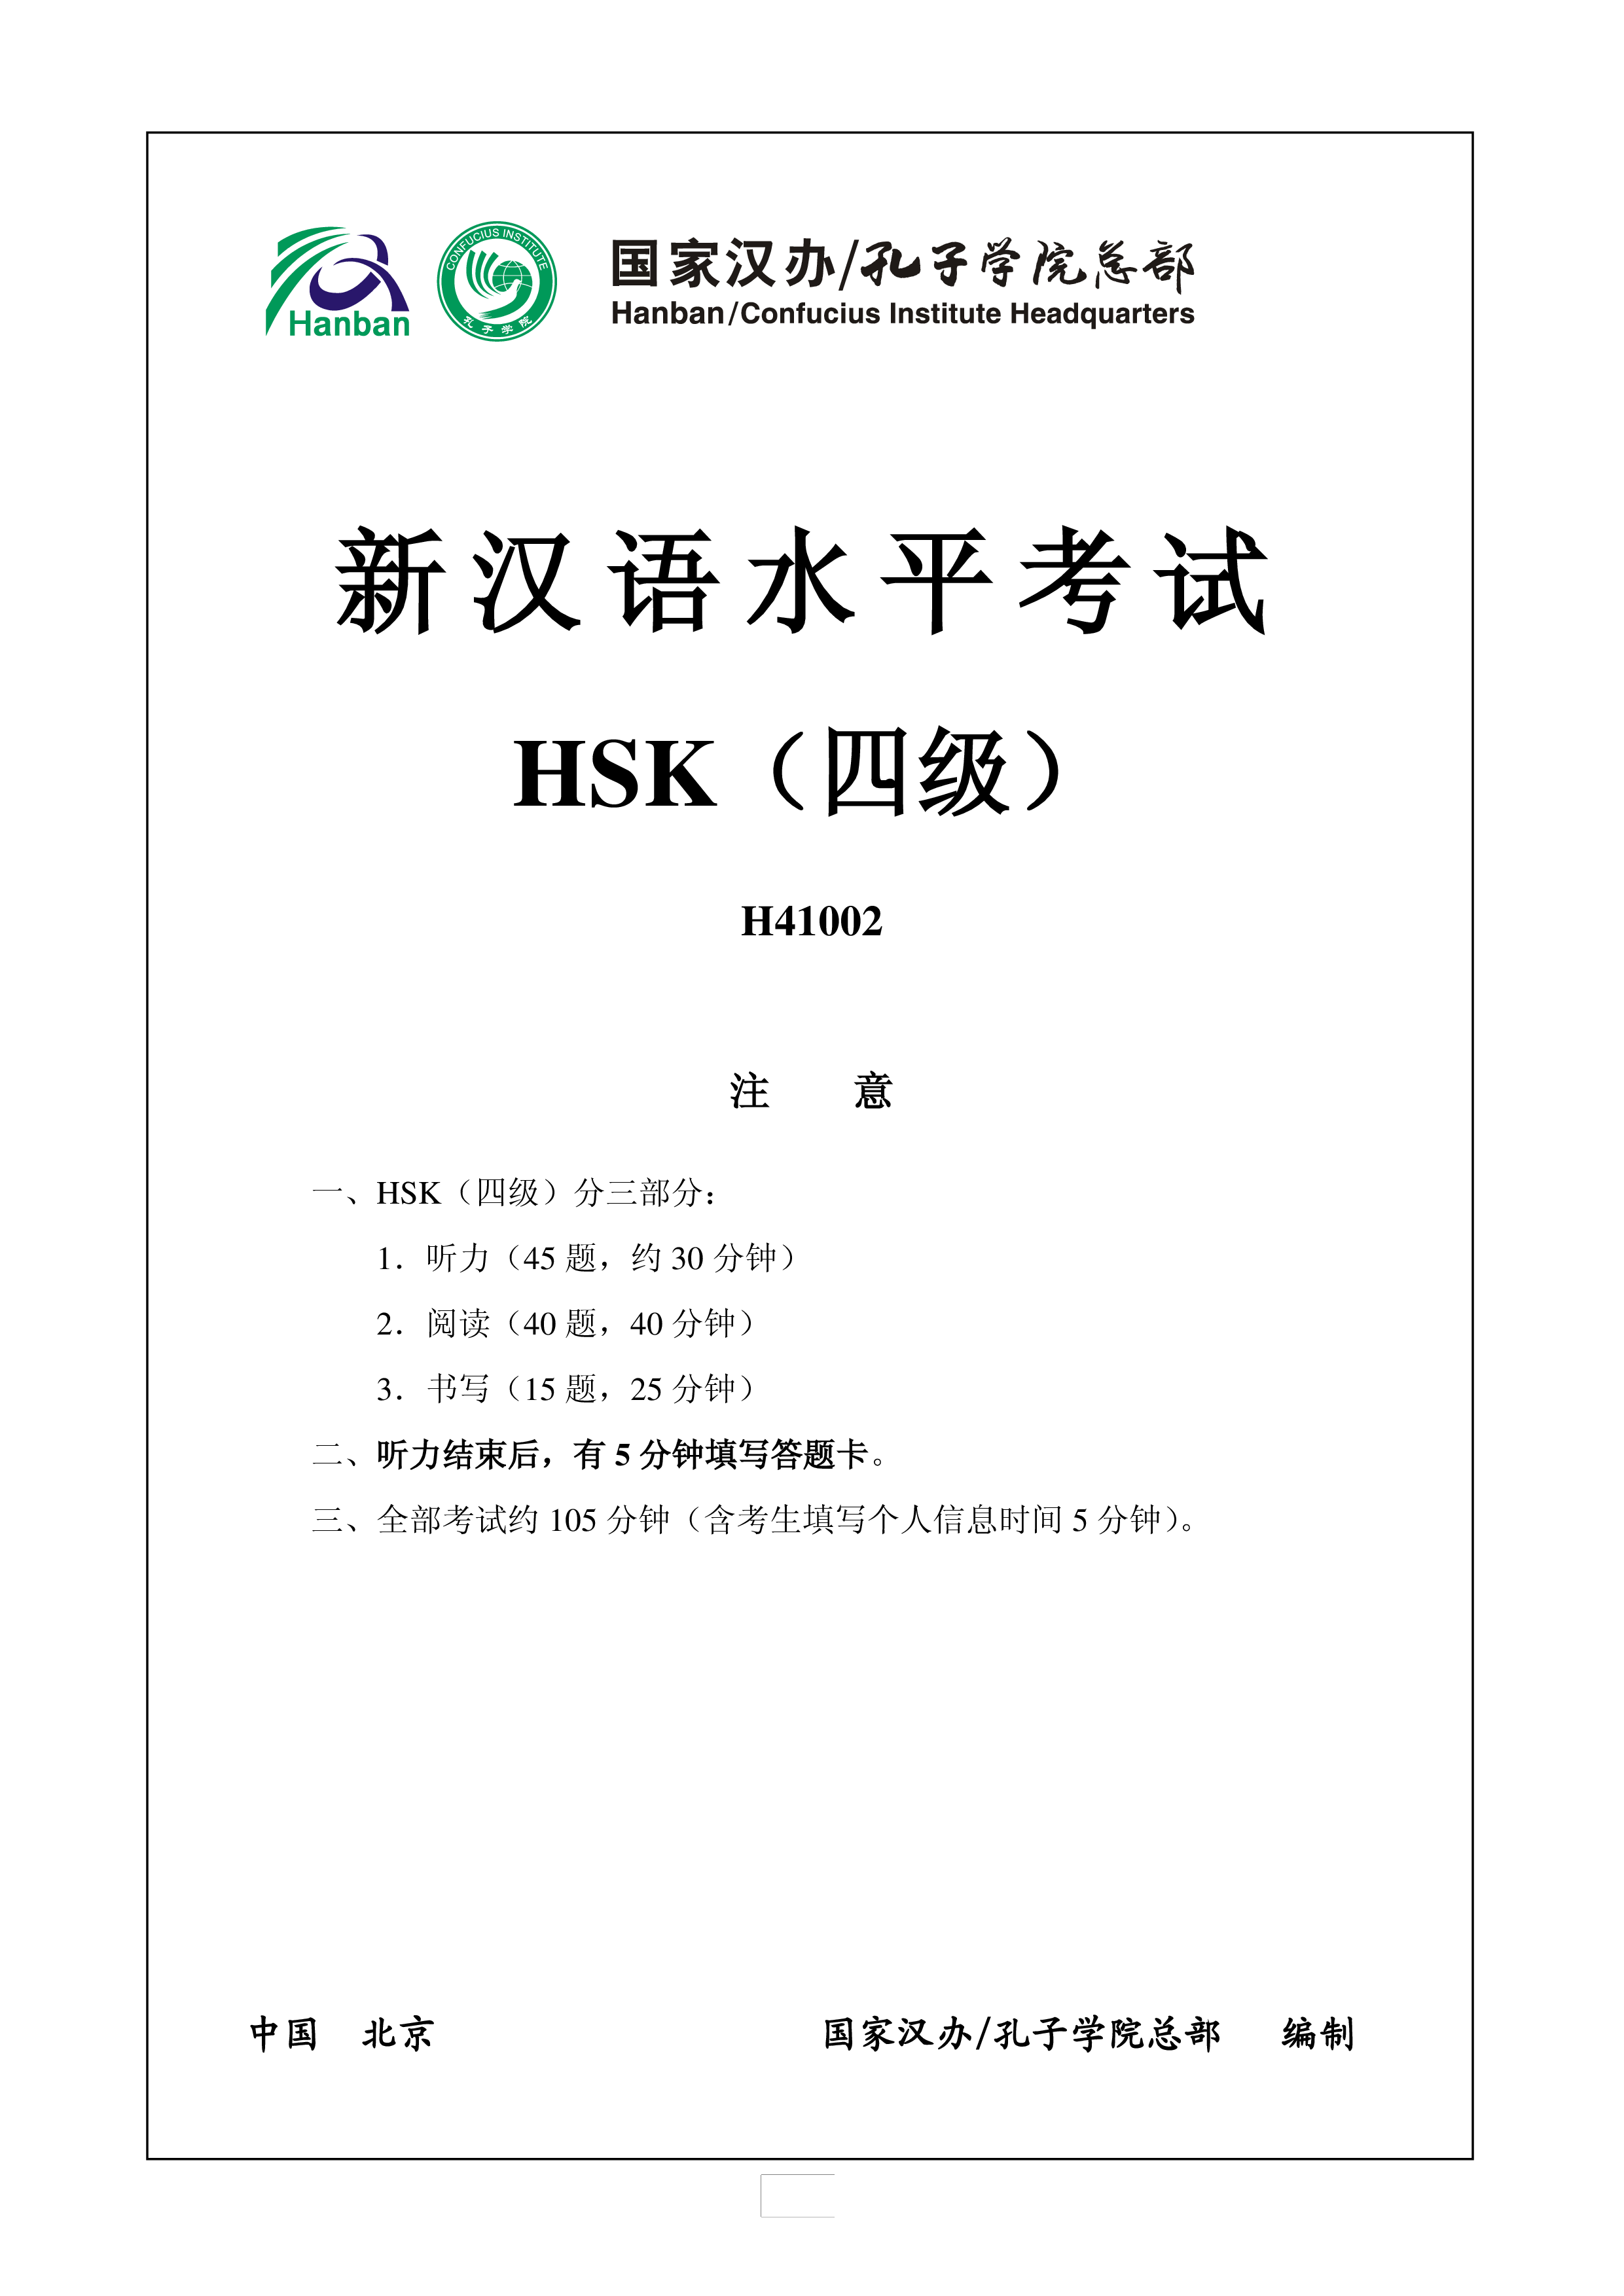 hsk4 chinese exam including answers # hsk h41002 plantilla imagen principal